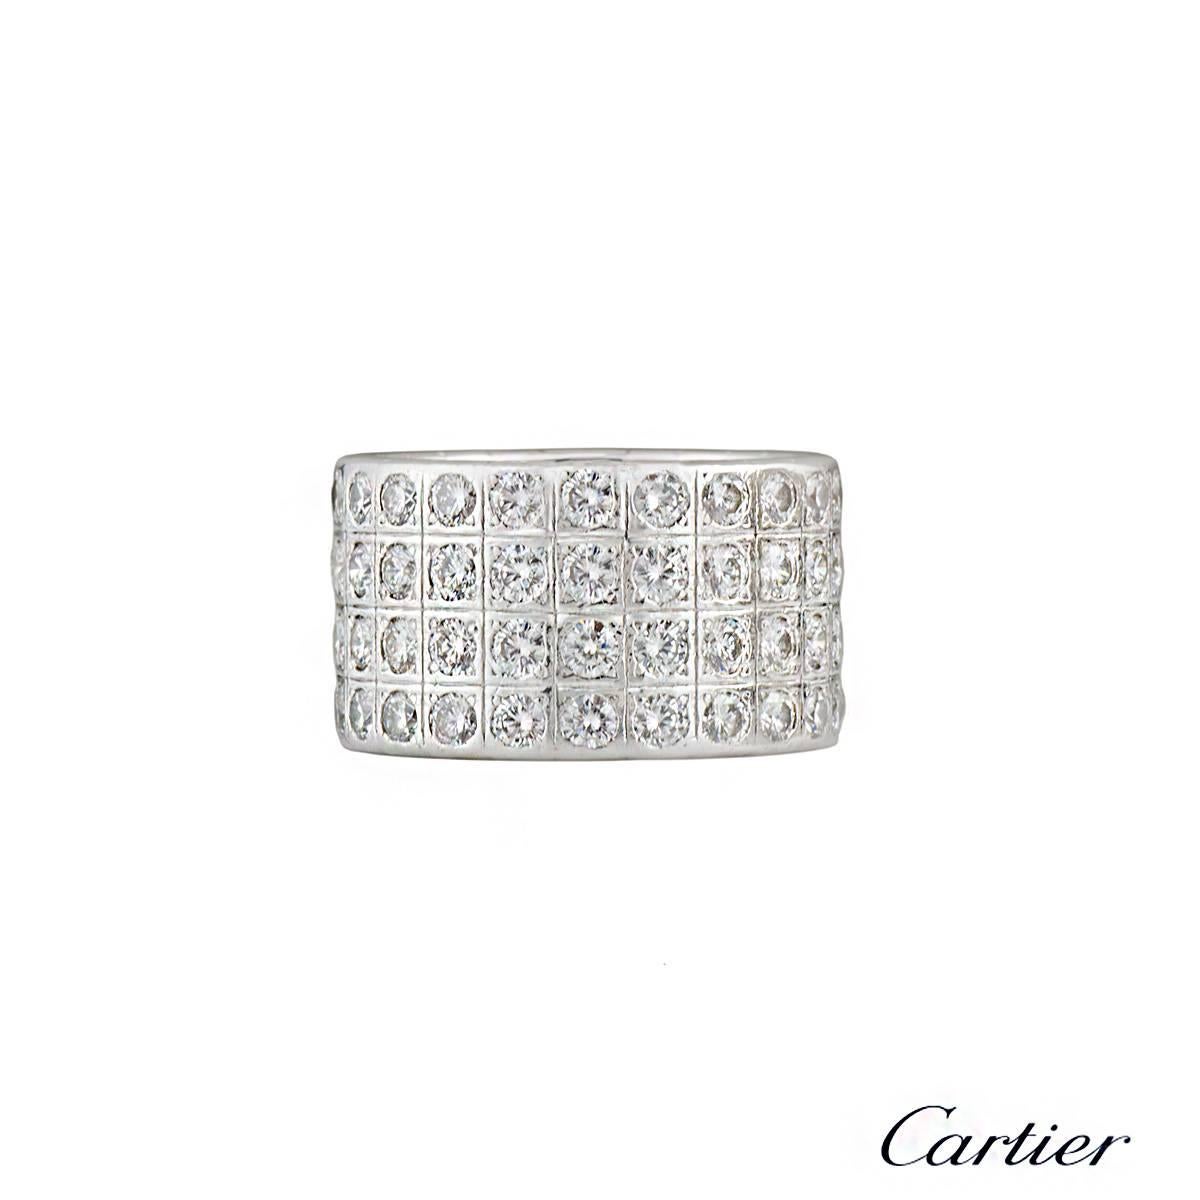 A Cartier 18k white gold and diamond ring from the Lanieres collection. The ring is composed of the signature series of squares, each containing a round brilliant cut diamond. There are a total of 84 round brilliant cut diamonds totalling